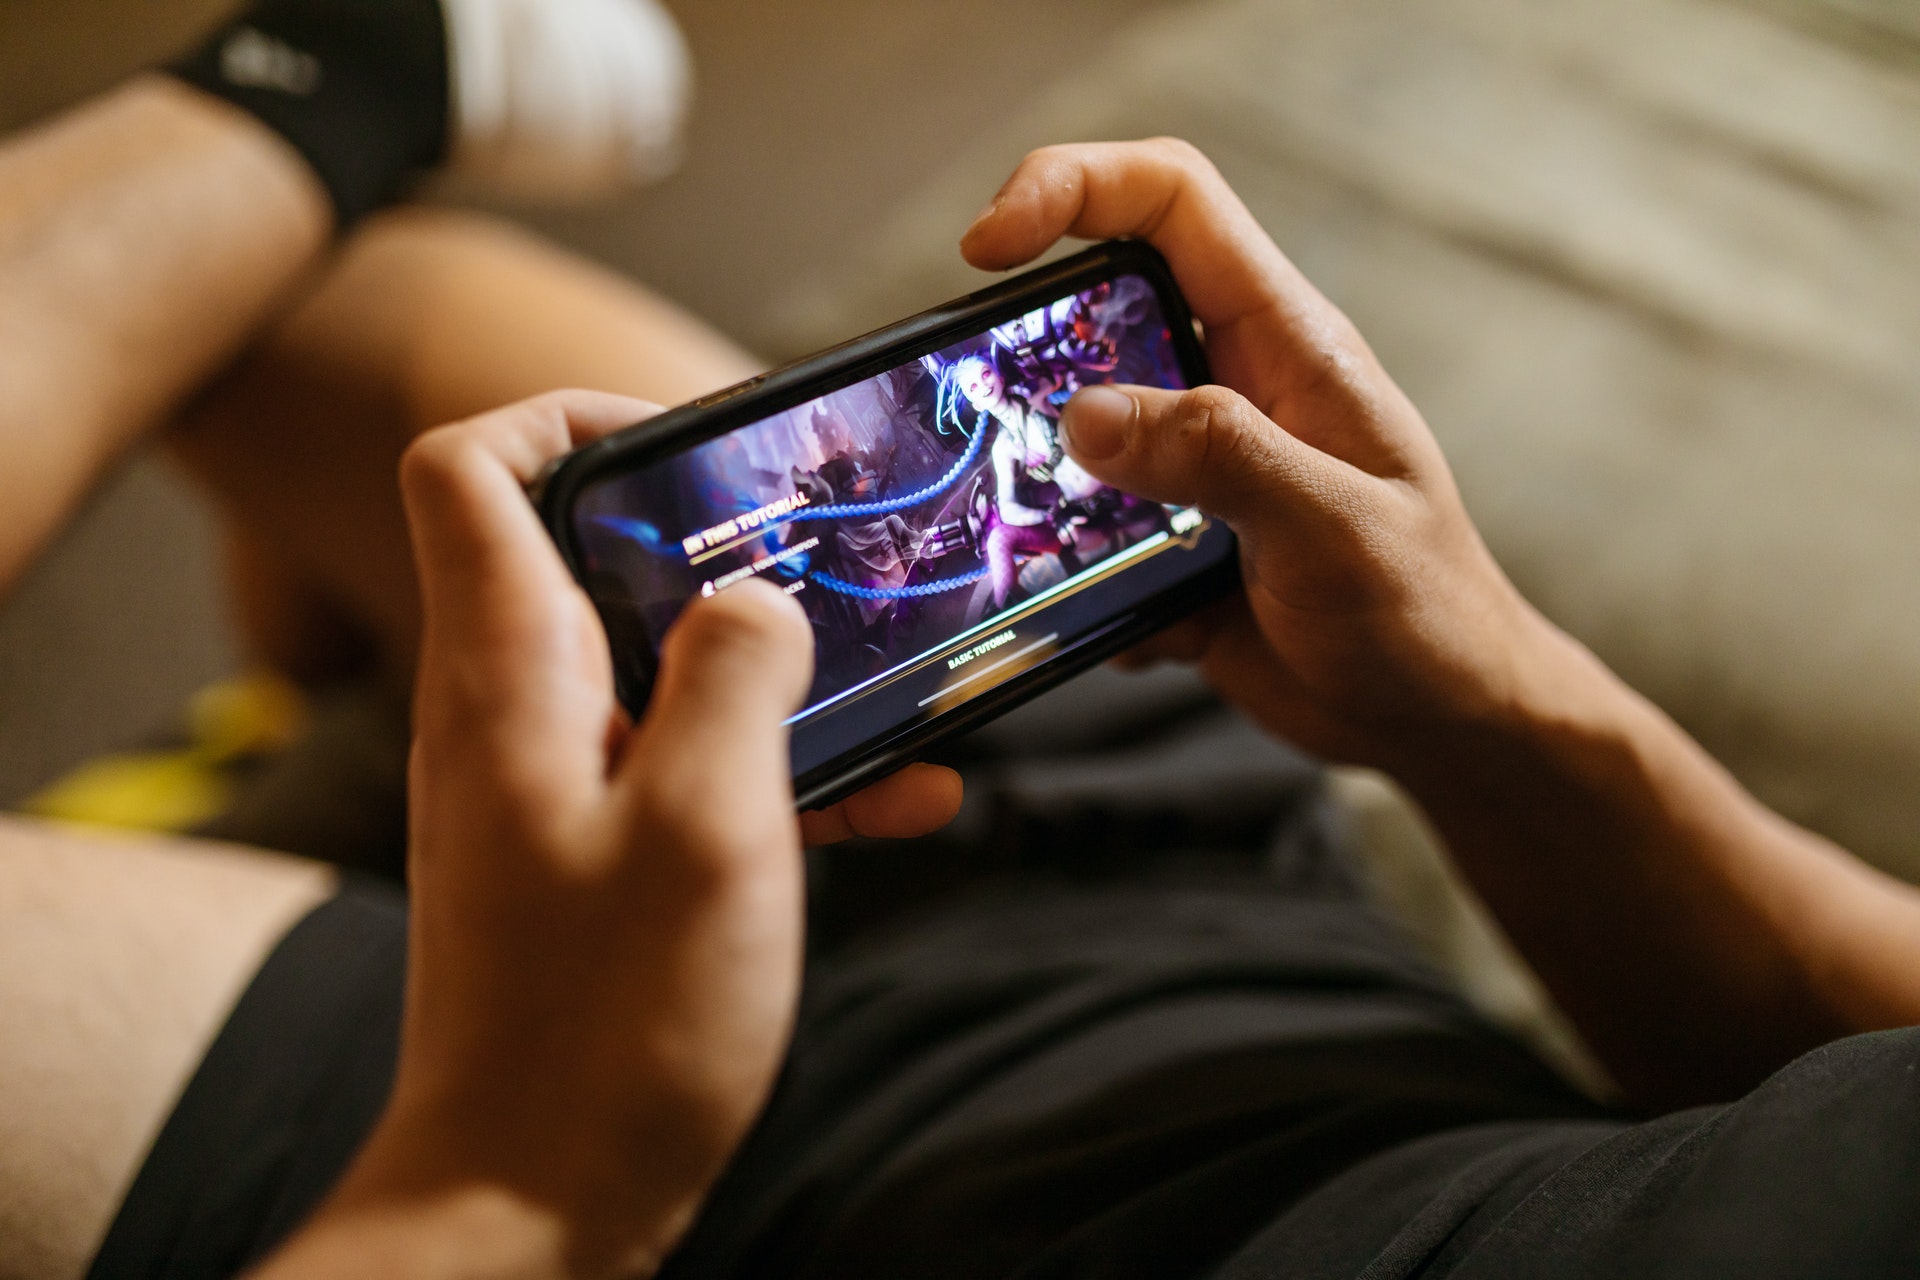 Why do we love playing online mobile games so much?